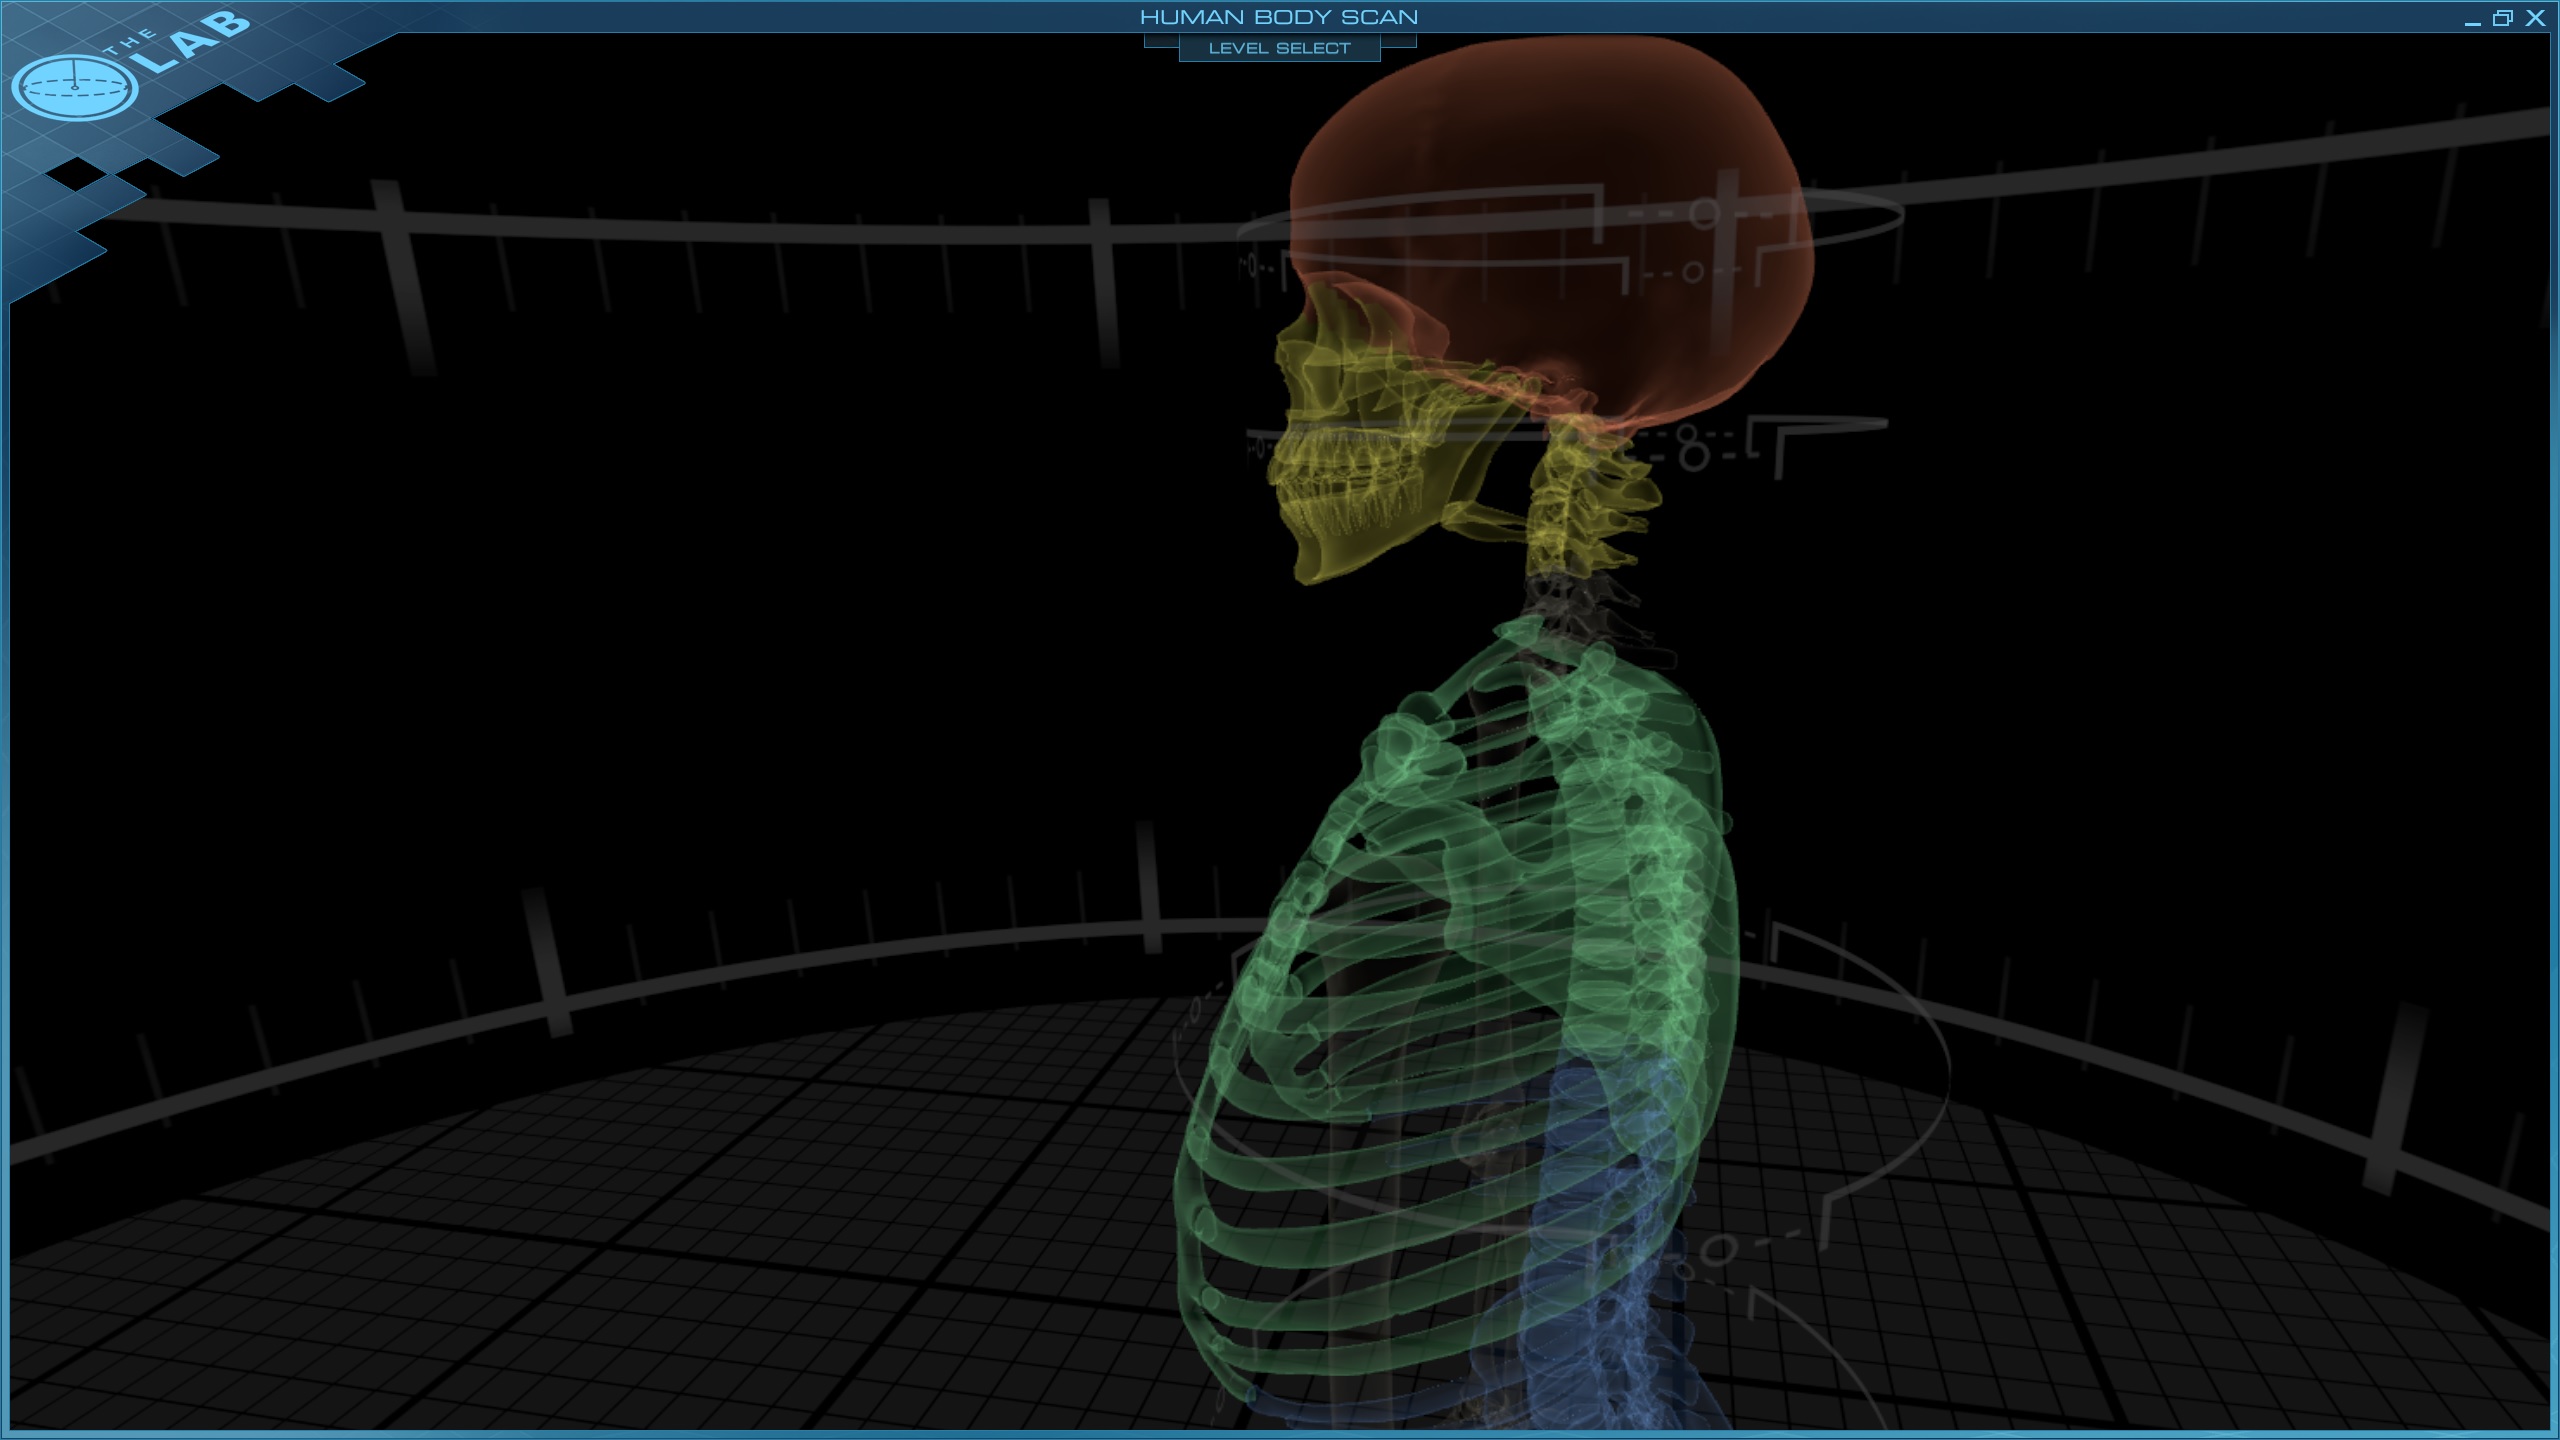 What Happens when Virtual Reality meets Medicine?